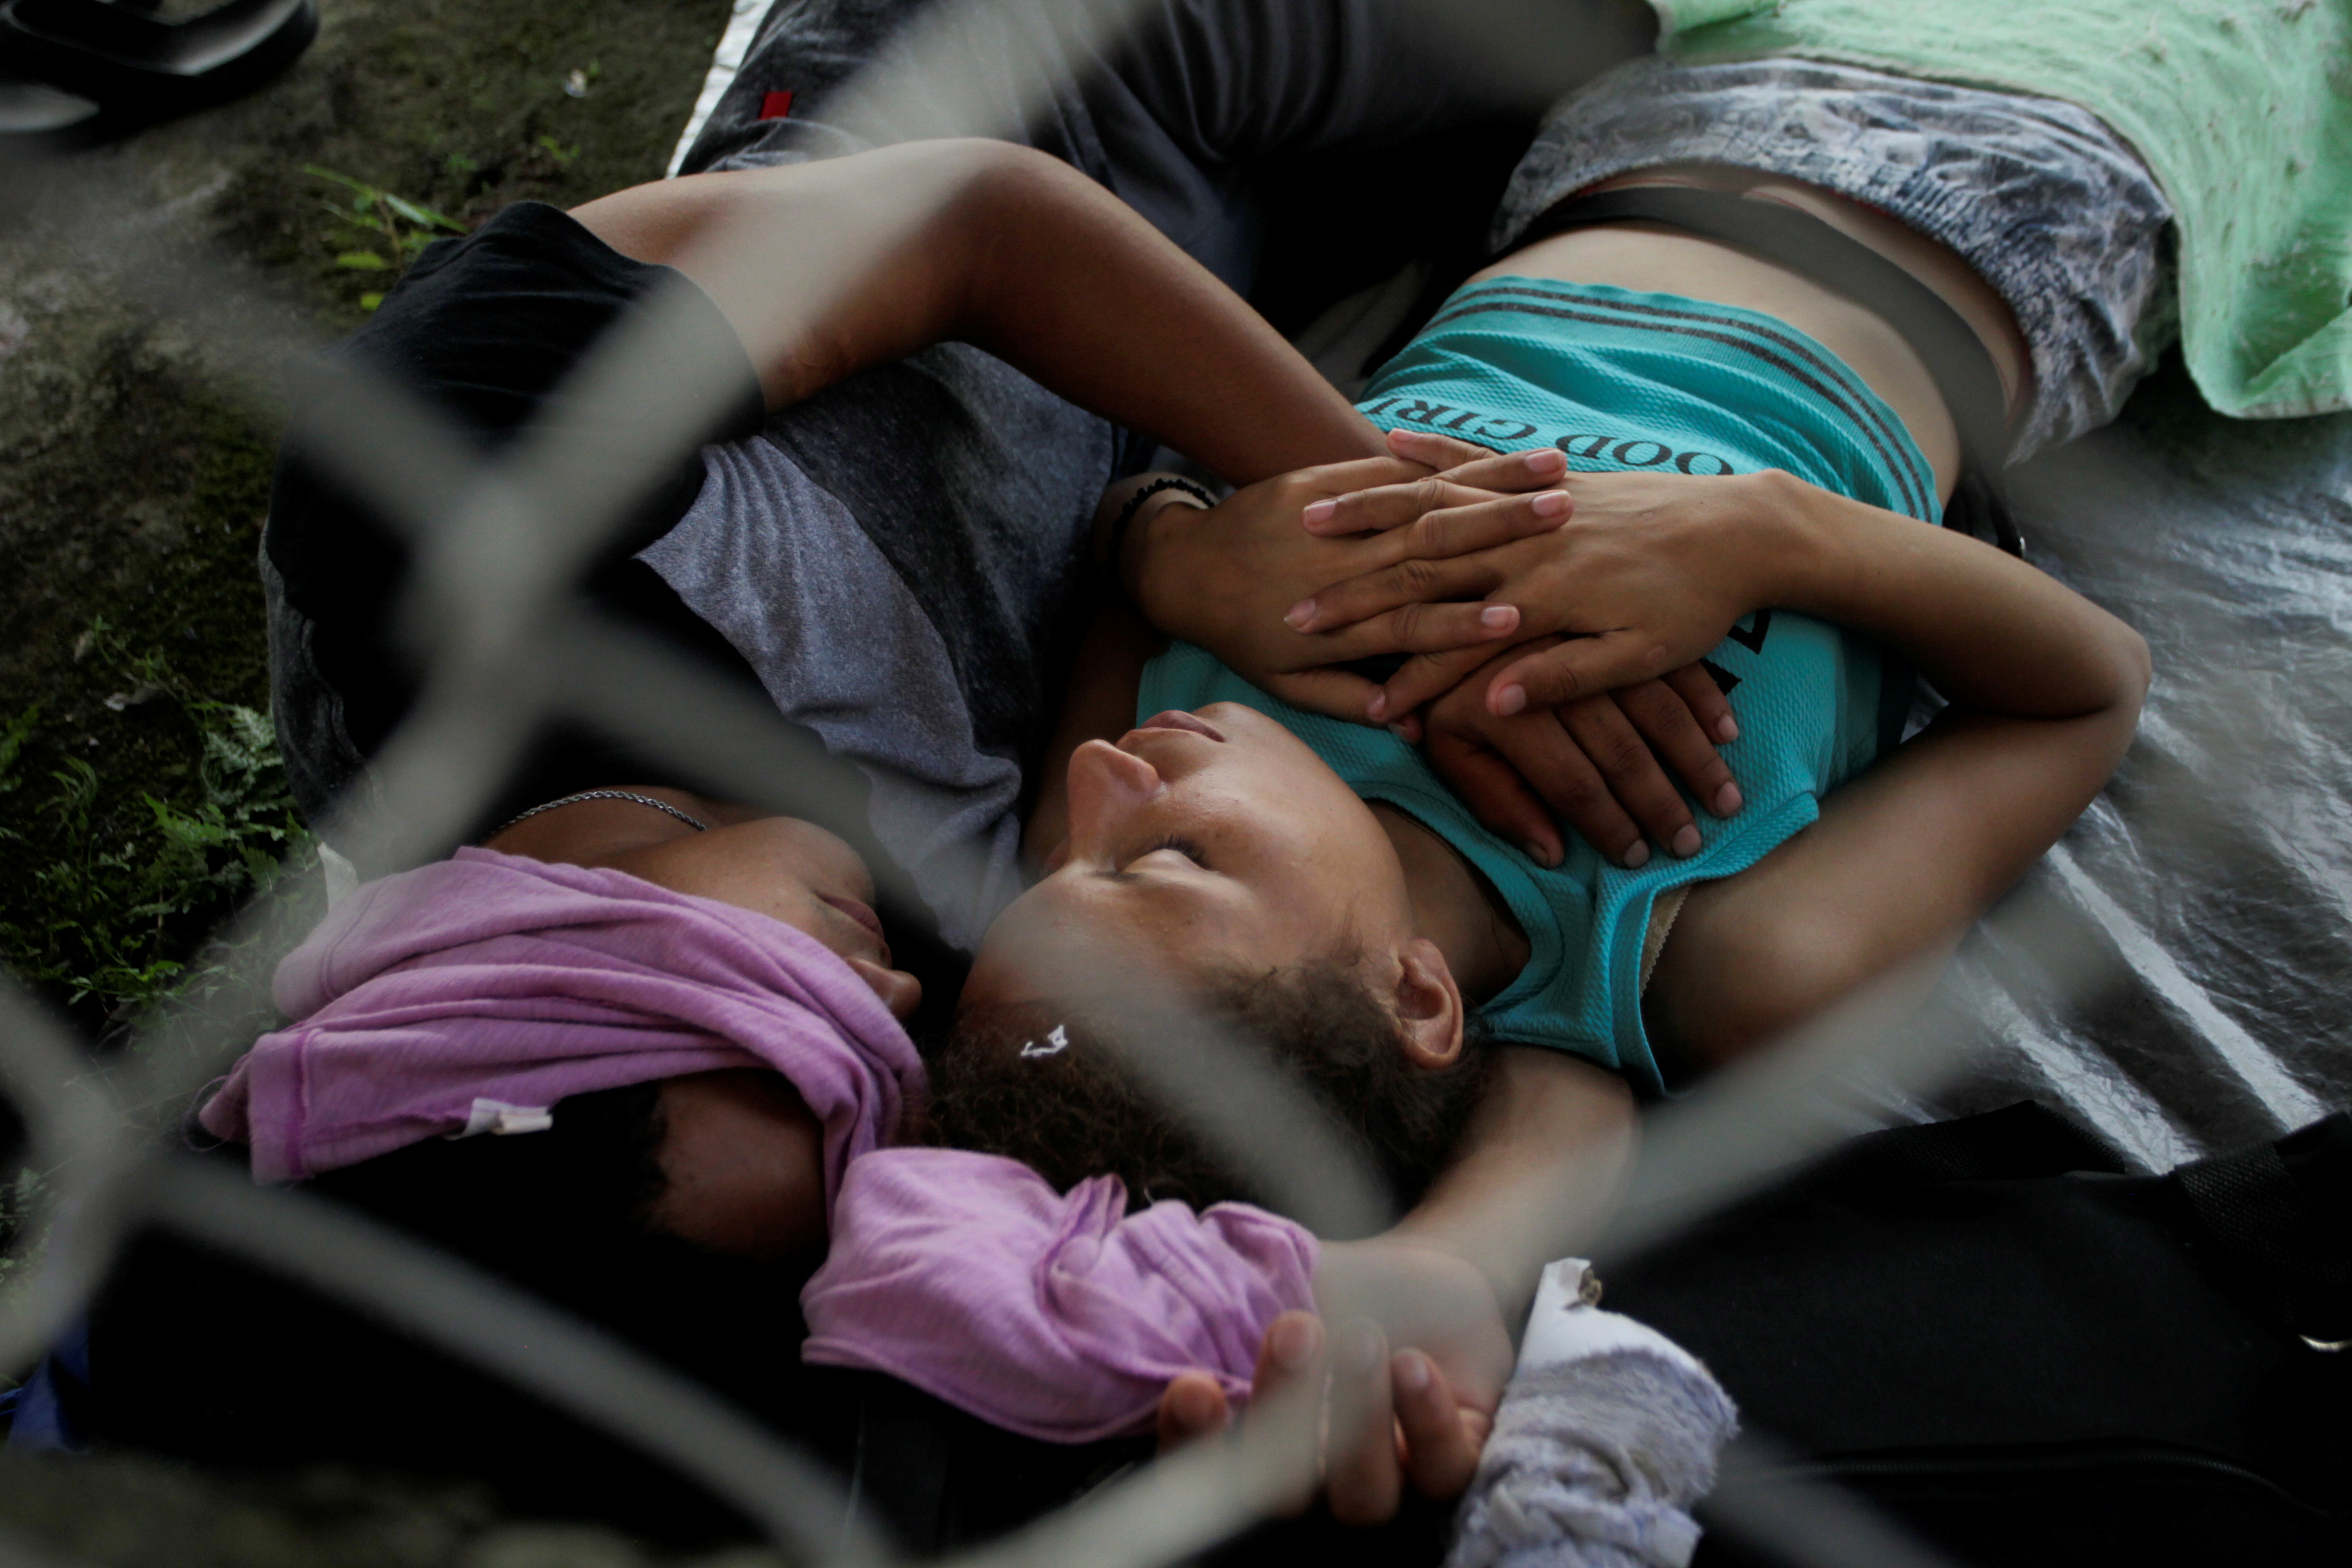 Migrants rest before they continue walking in a caravan heading to Mexico City, in Consuelo Ulapa